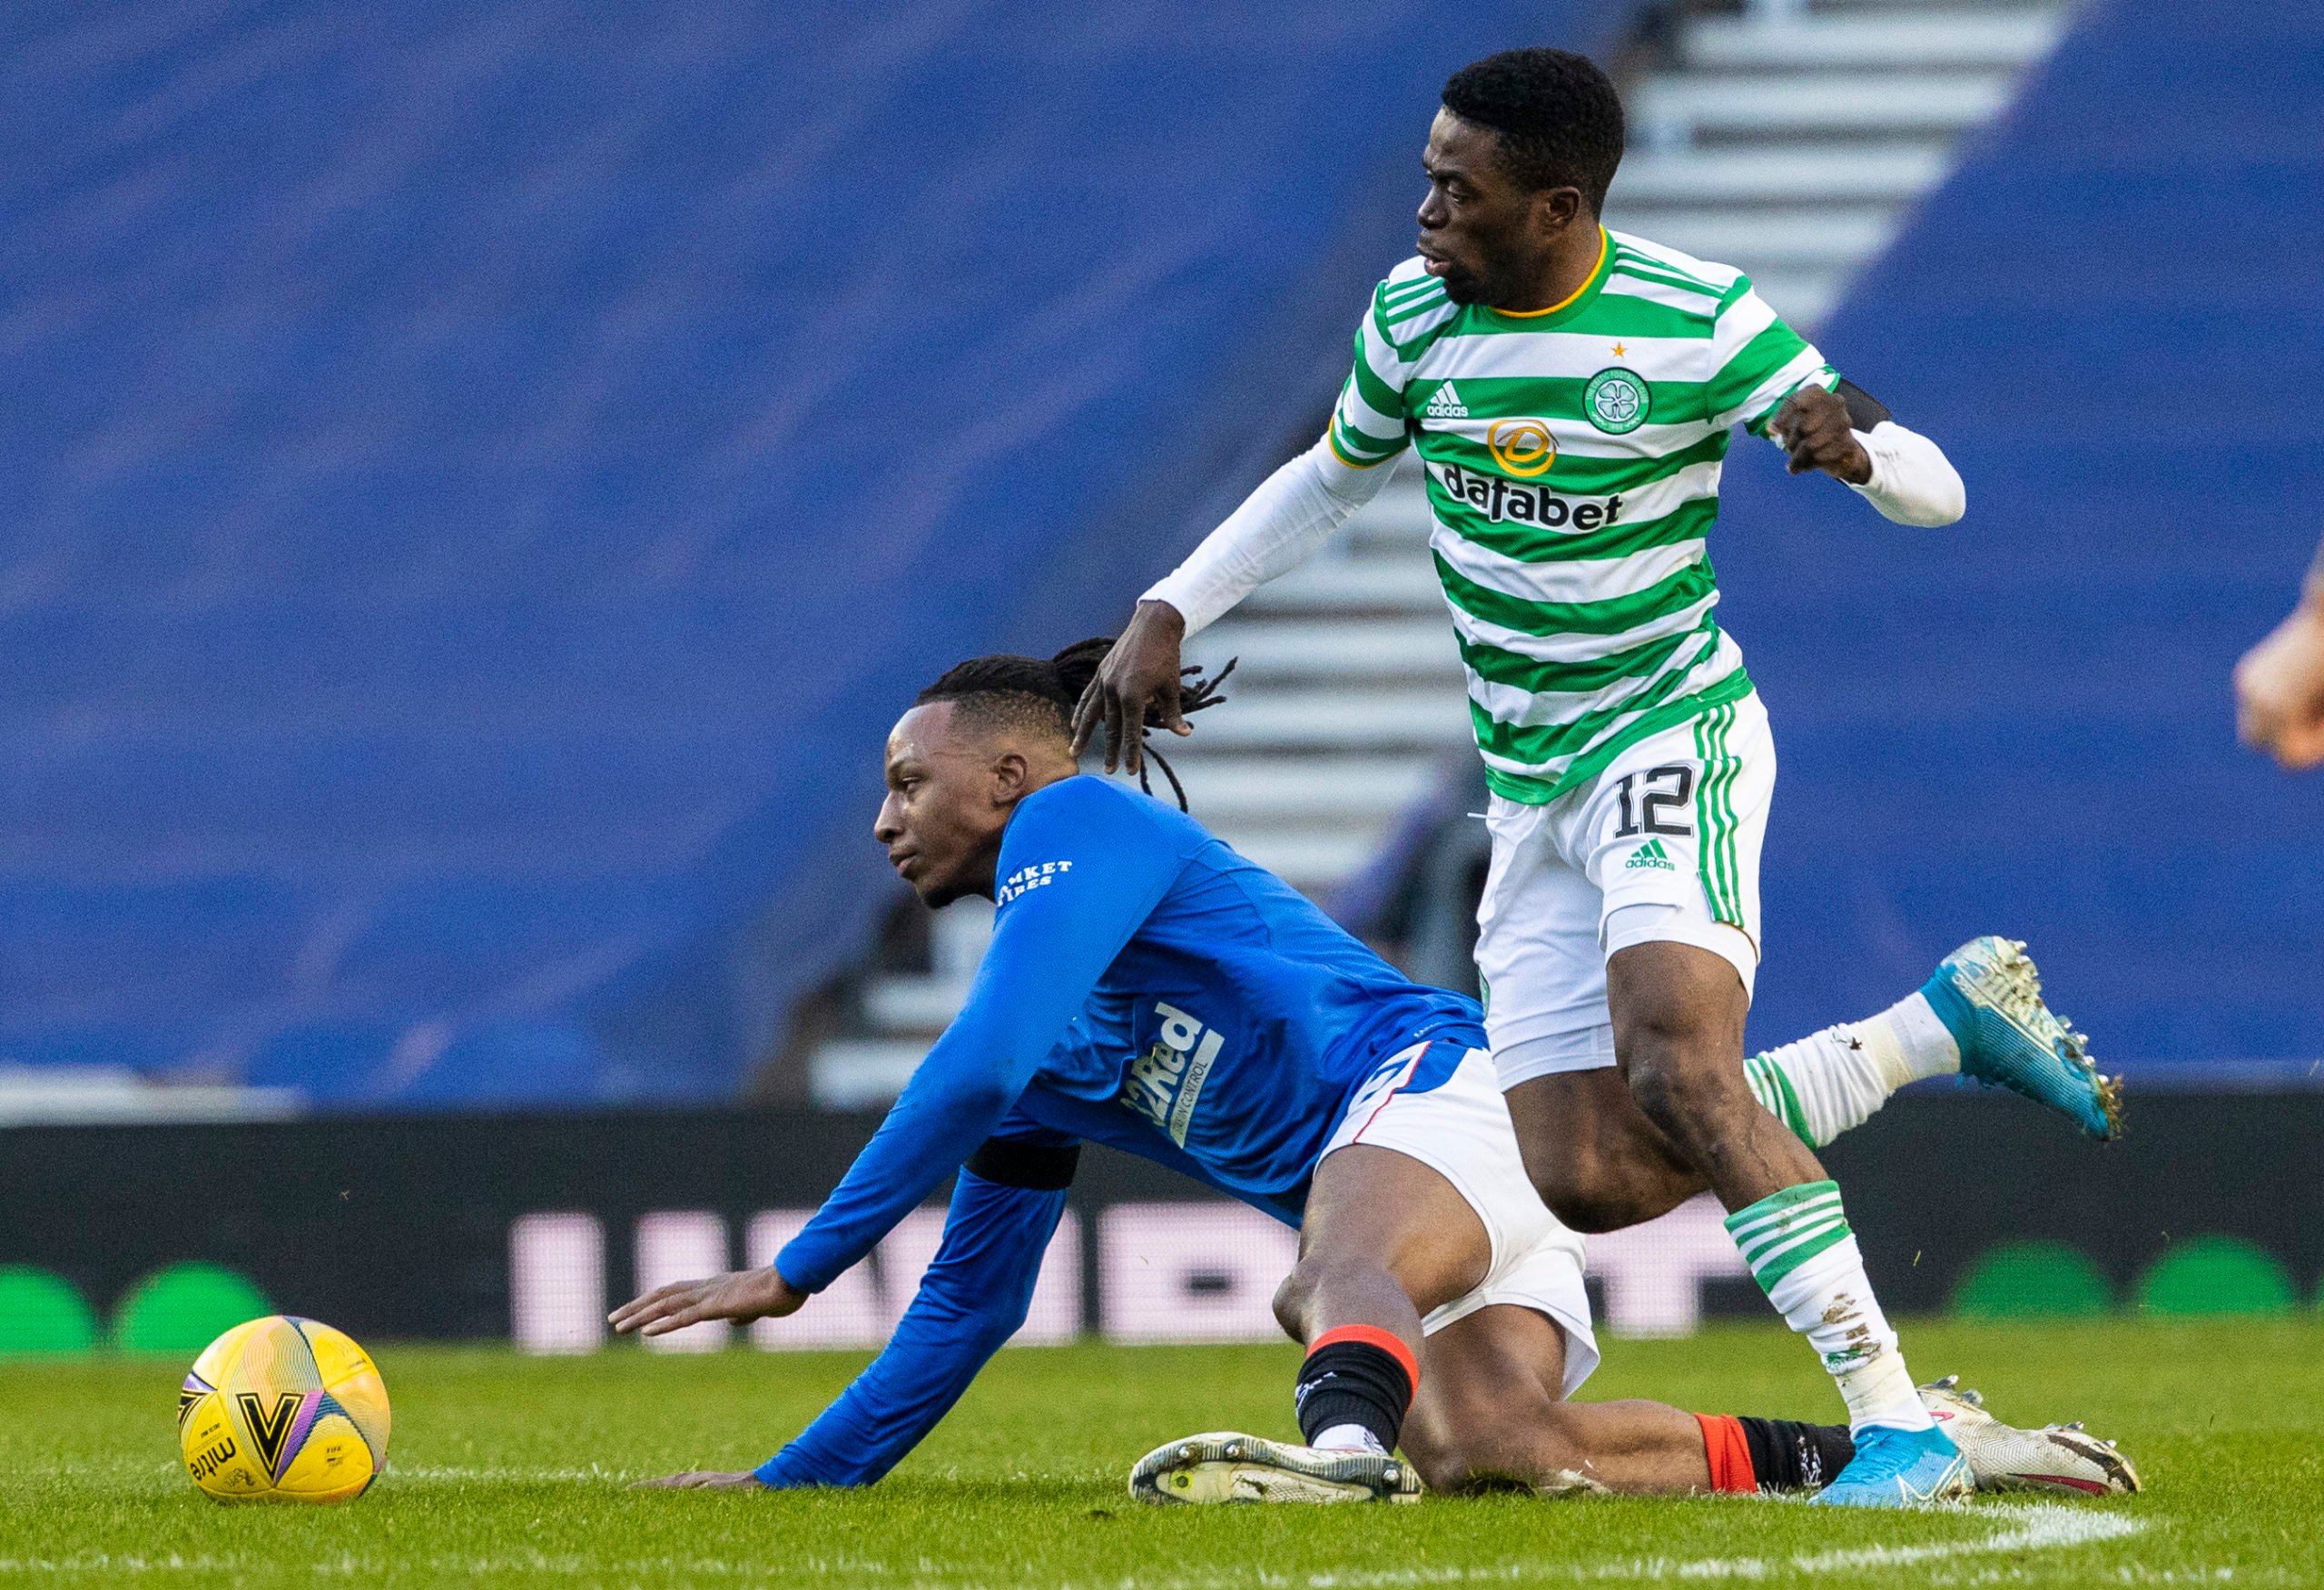 Ismaila Soro in action against Rangers